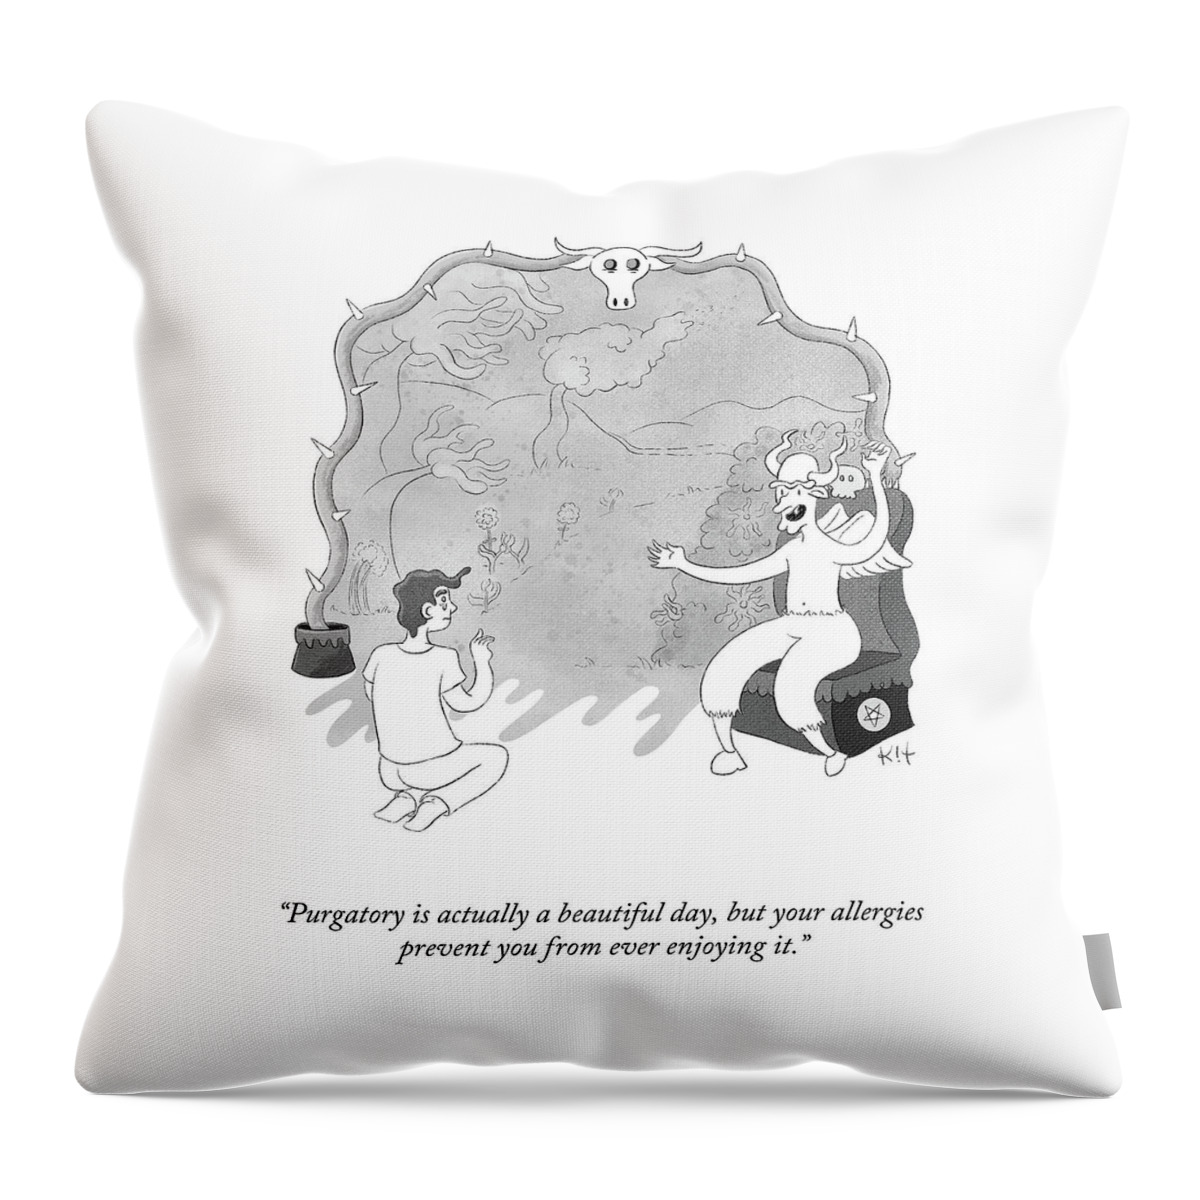 Purgatory Is Actually A Beautiful Day Throw Pillow